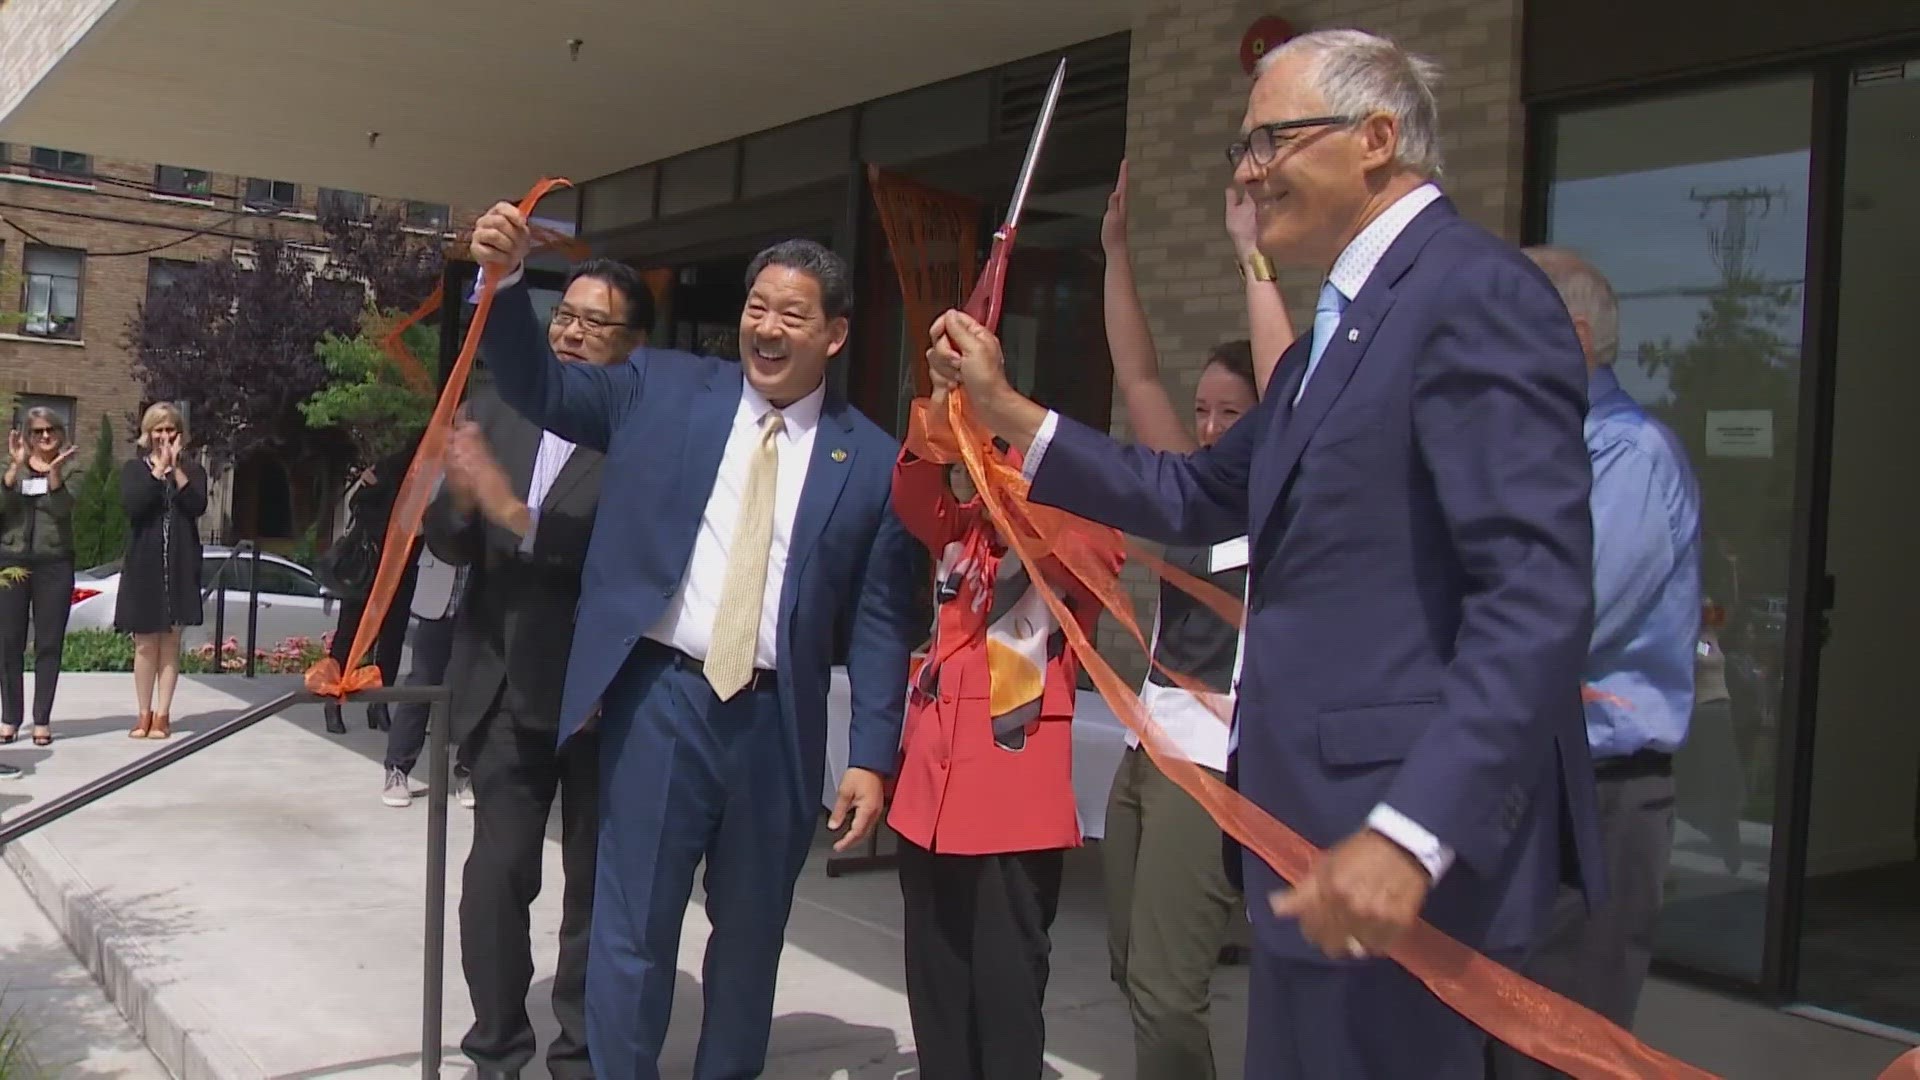 Governor Jay Inslee was at the opening and says the project is an example of using available resources to create more affordable housing across the state.